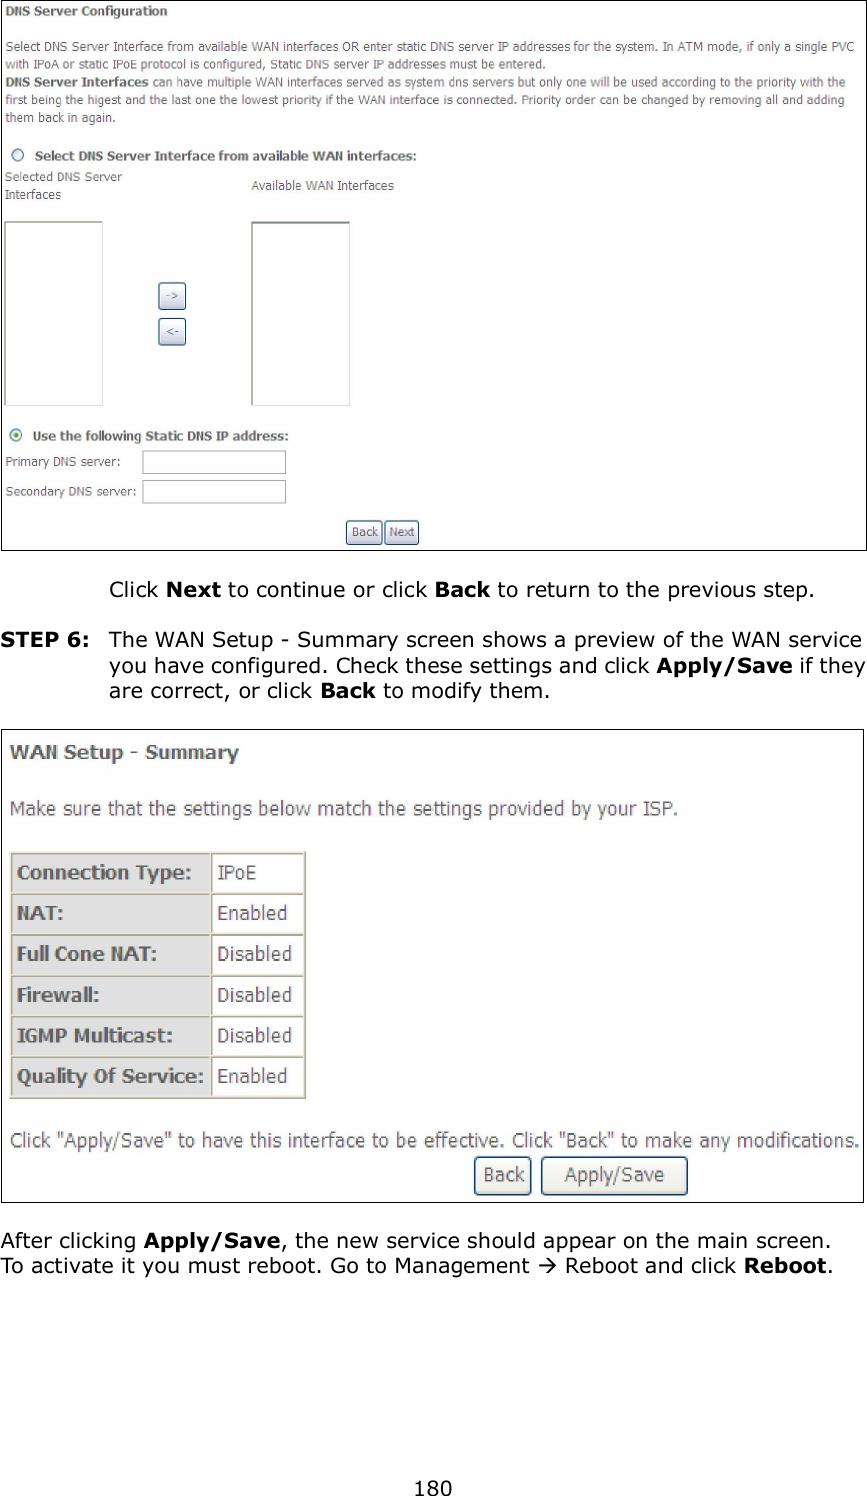  180     Click Next to continue or click Back to return to the previous step.  STEP 6:  The WAN Setup - Summary screen shows a preview of the WAN service you have configured. Check these settings and click Apply/Save if they are correct, or click Back to modify them.    After clicking Apply/Save, the new service should appear on the main screen.   To activate it you must reboot. Go to Management  Reboot and click Reboot.       